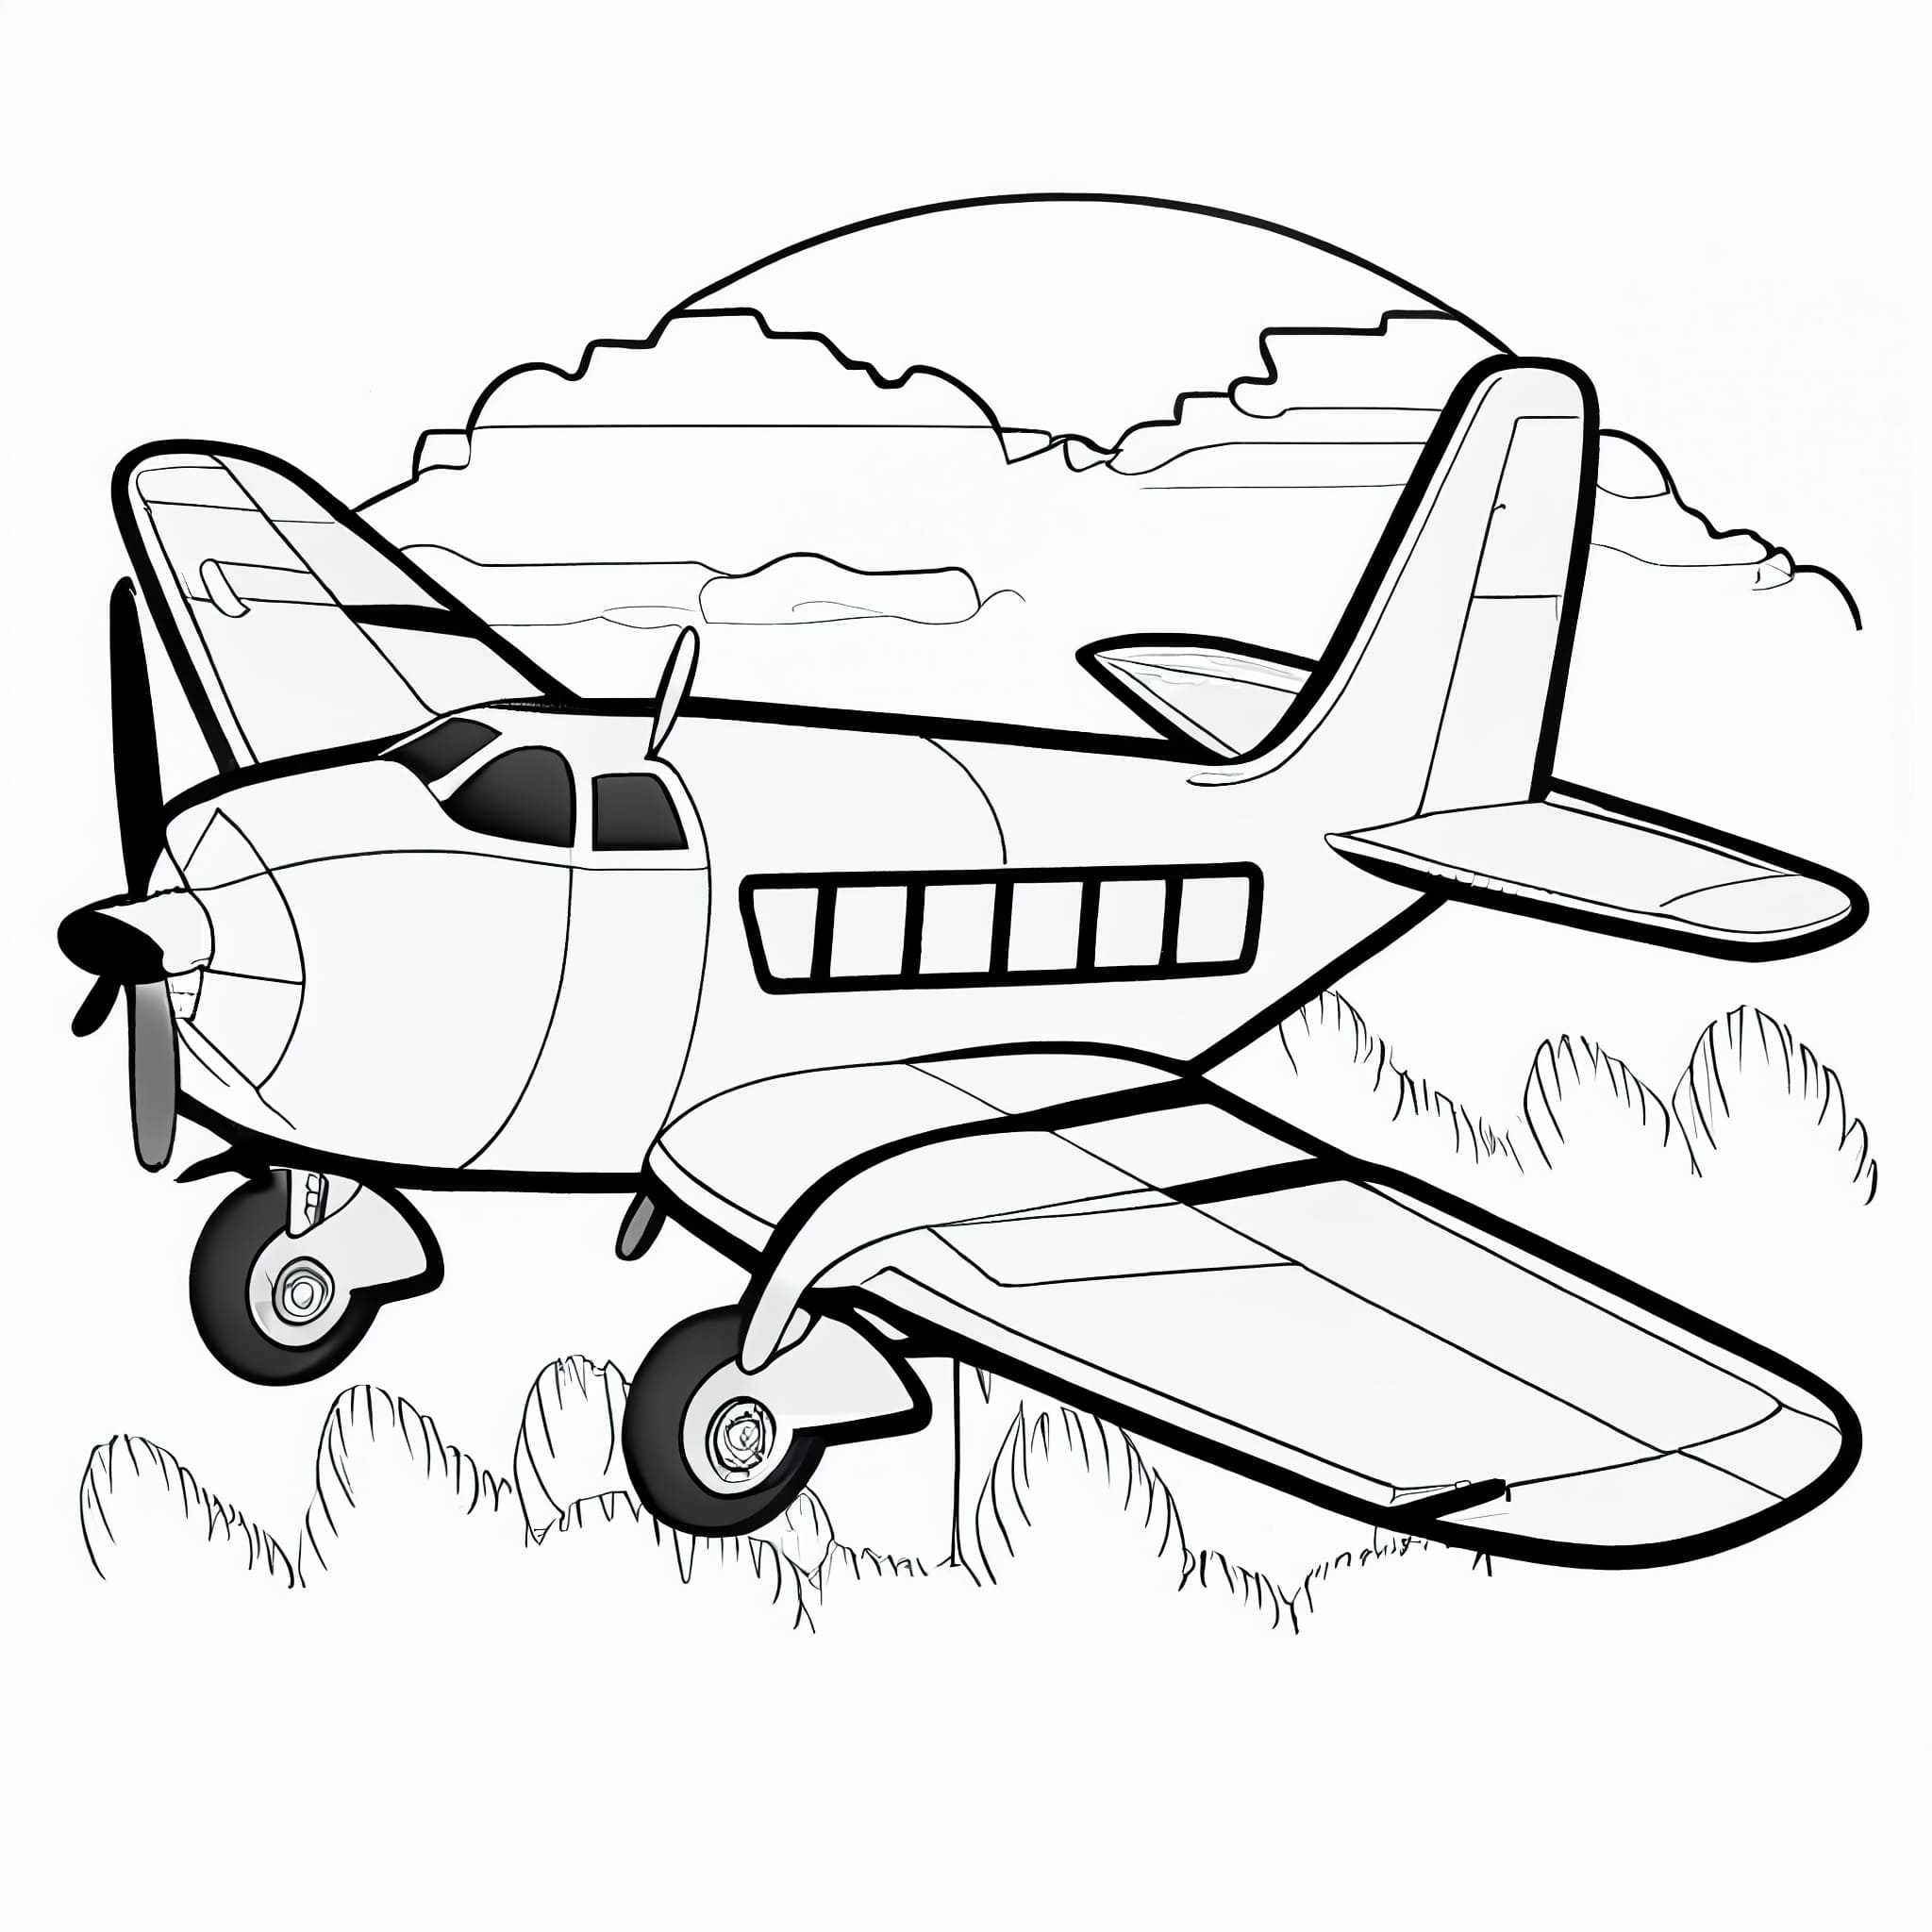 Airplane coloring pages free printable images